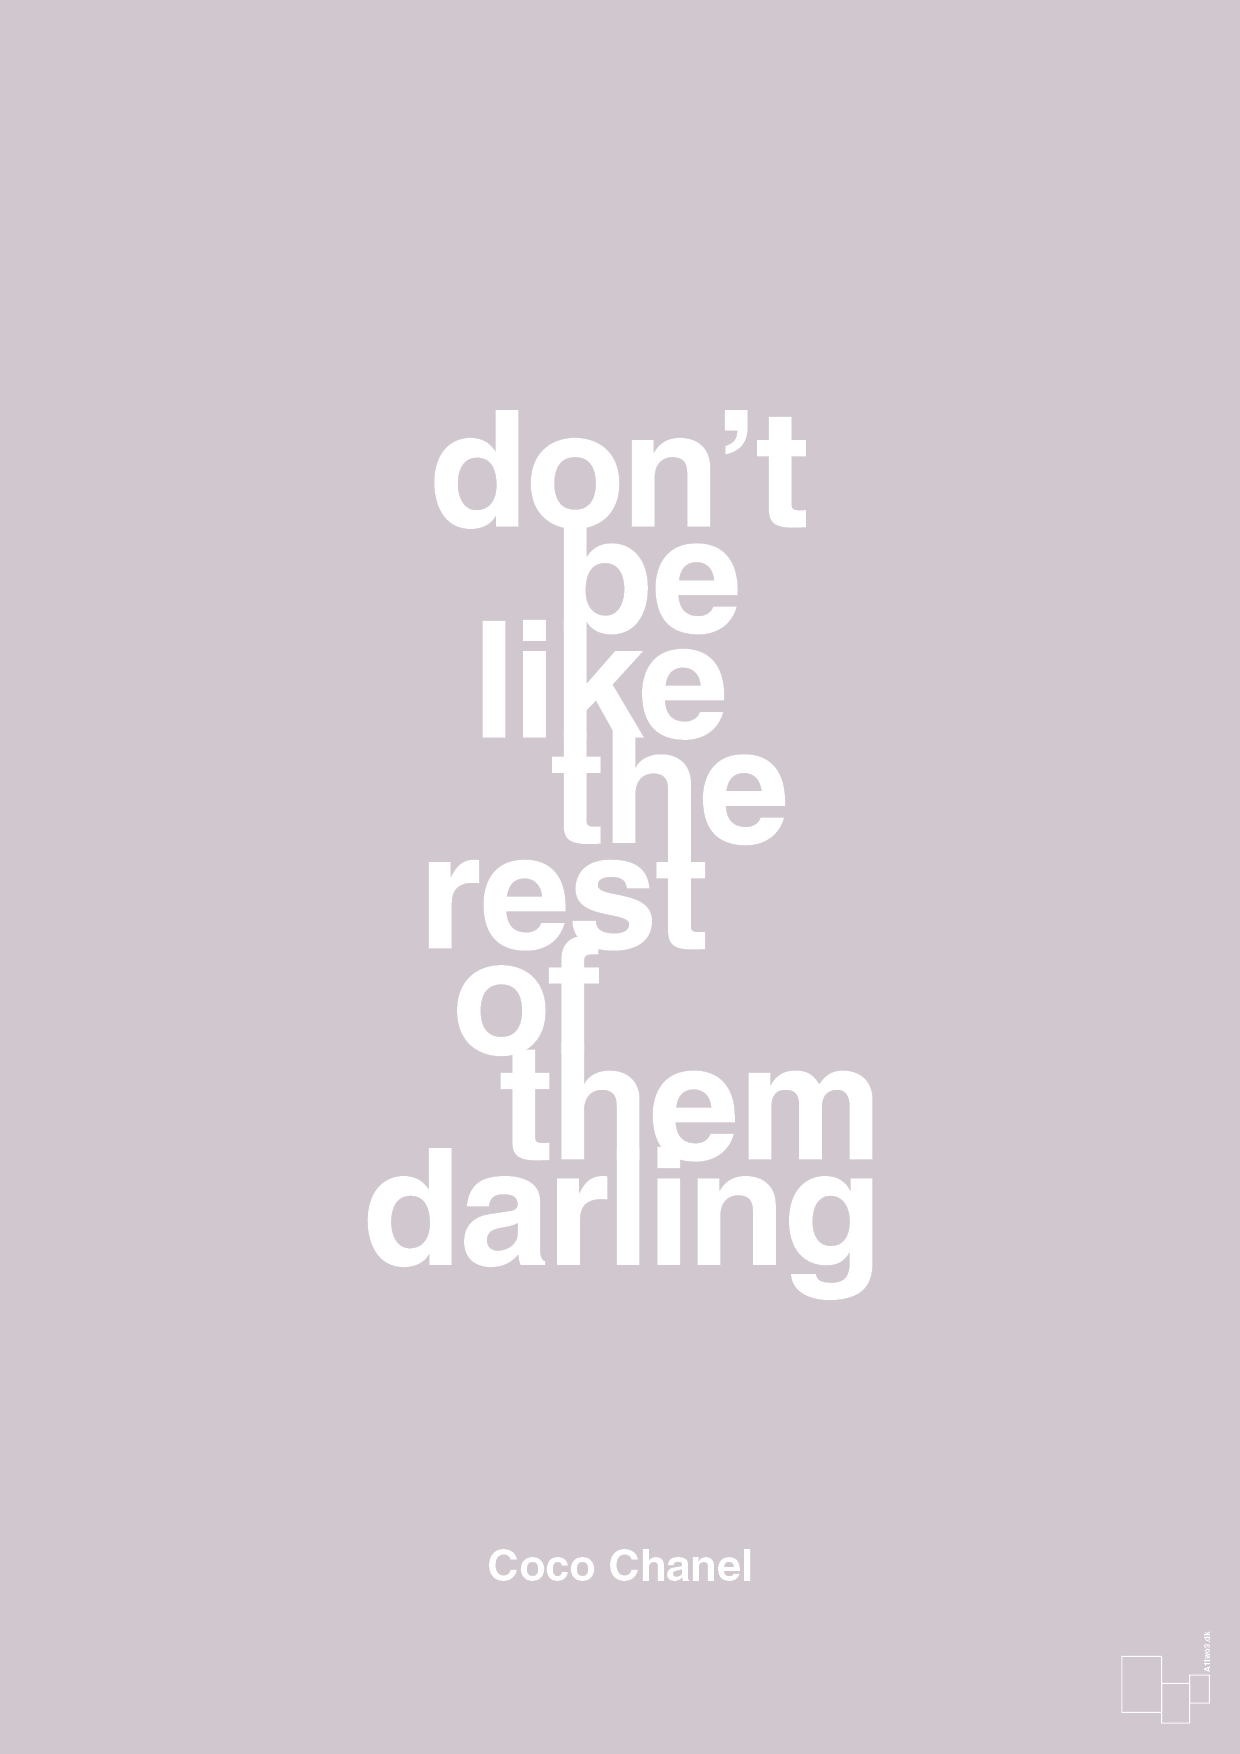 don’t be like the rest of them darling - Plakat med Citater i Dusty Lilac